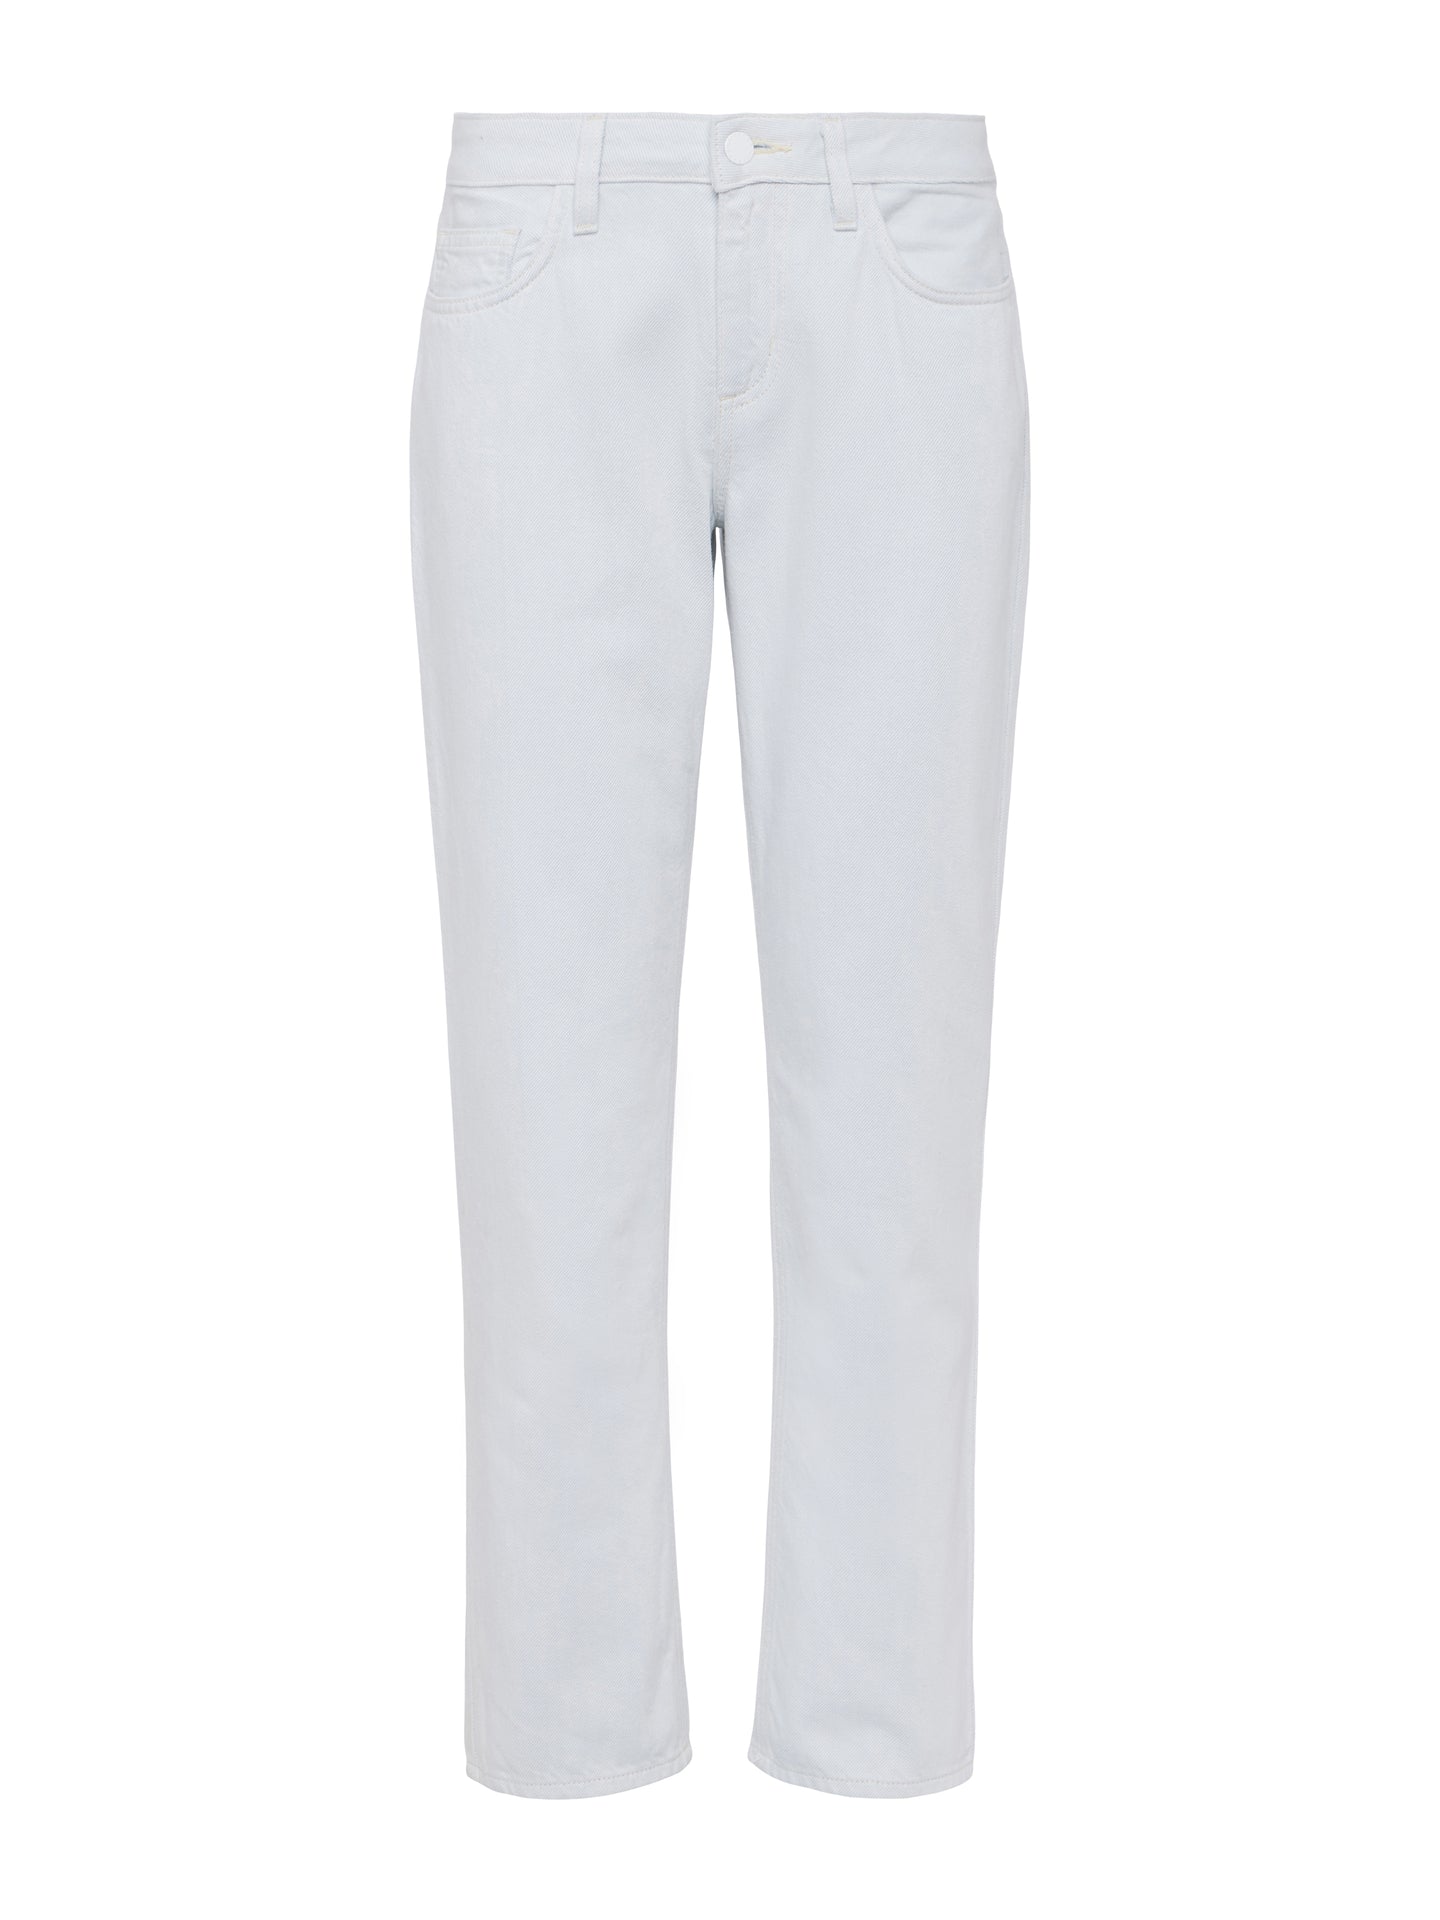 Lagence Mateo Mr Slouchy Straight Pant